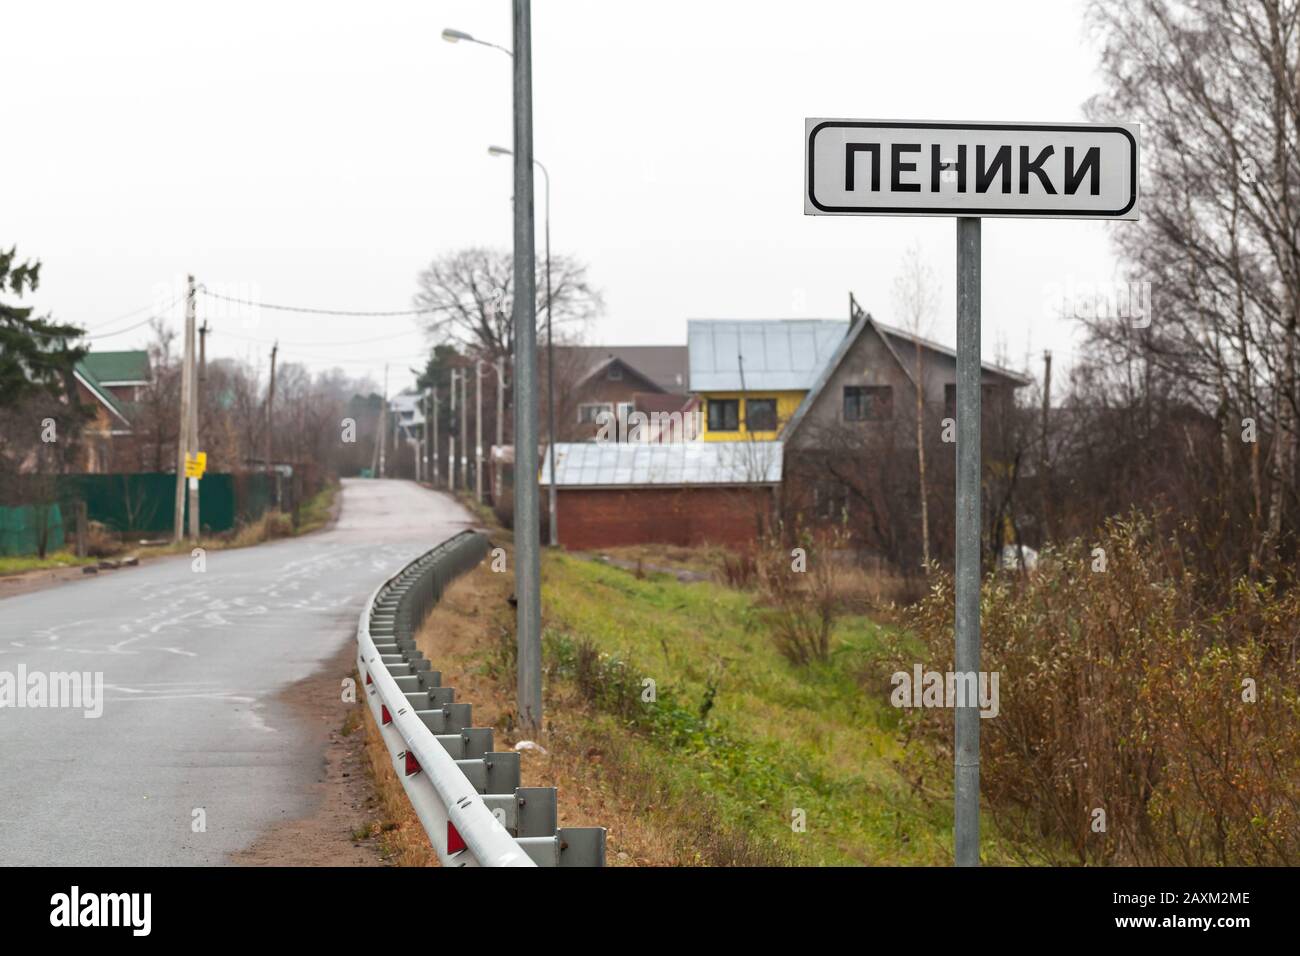 Peniki, Russia - September 11, 2019: road sign with urban village name Peniki stands near rural Russian highway Stock Photo